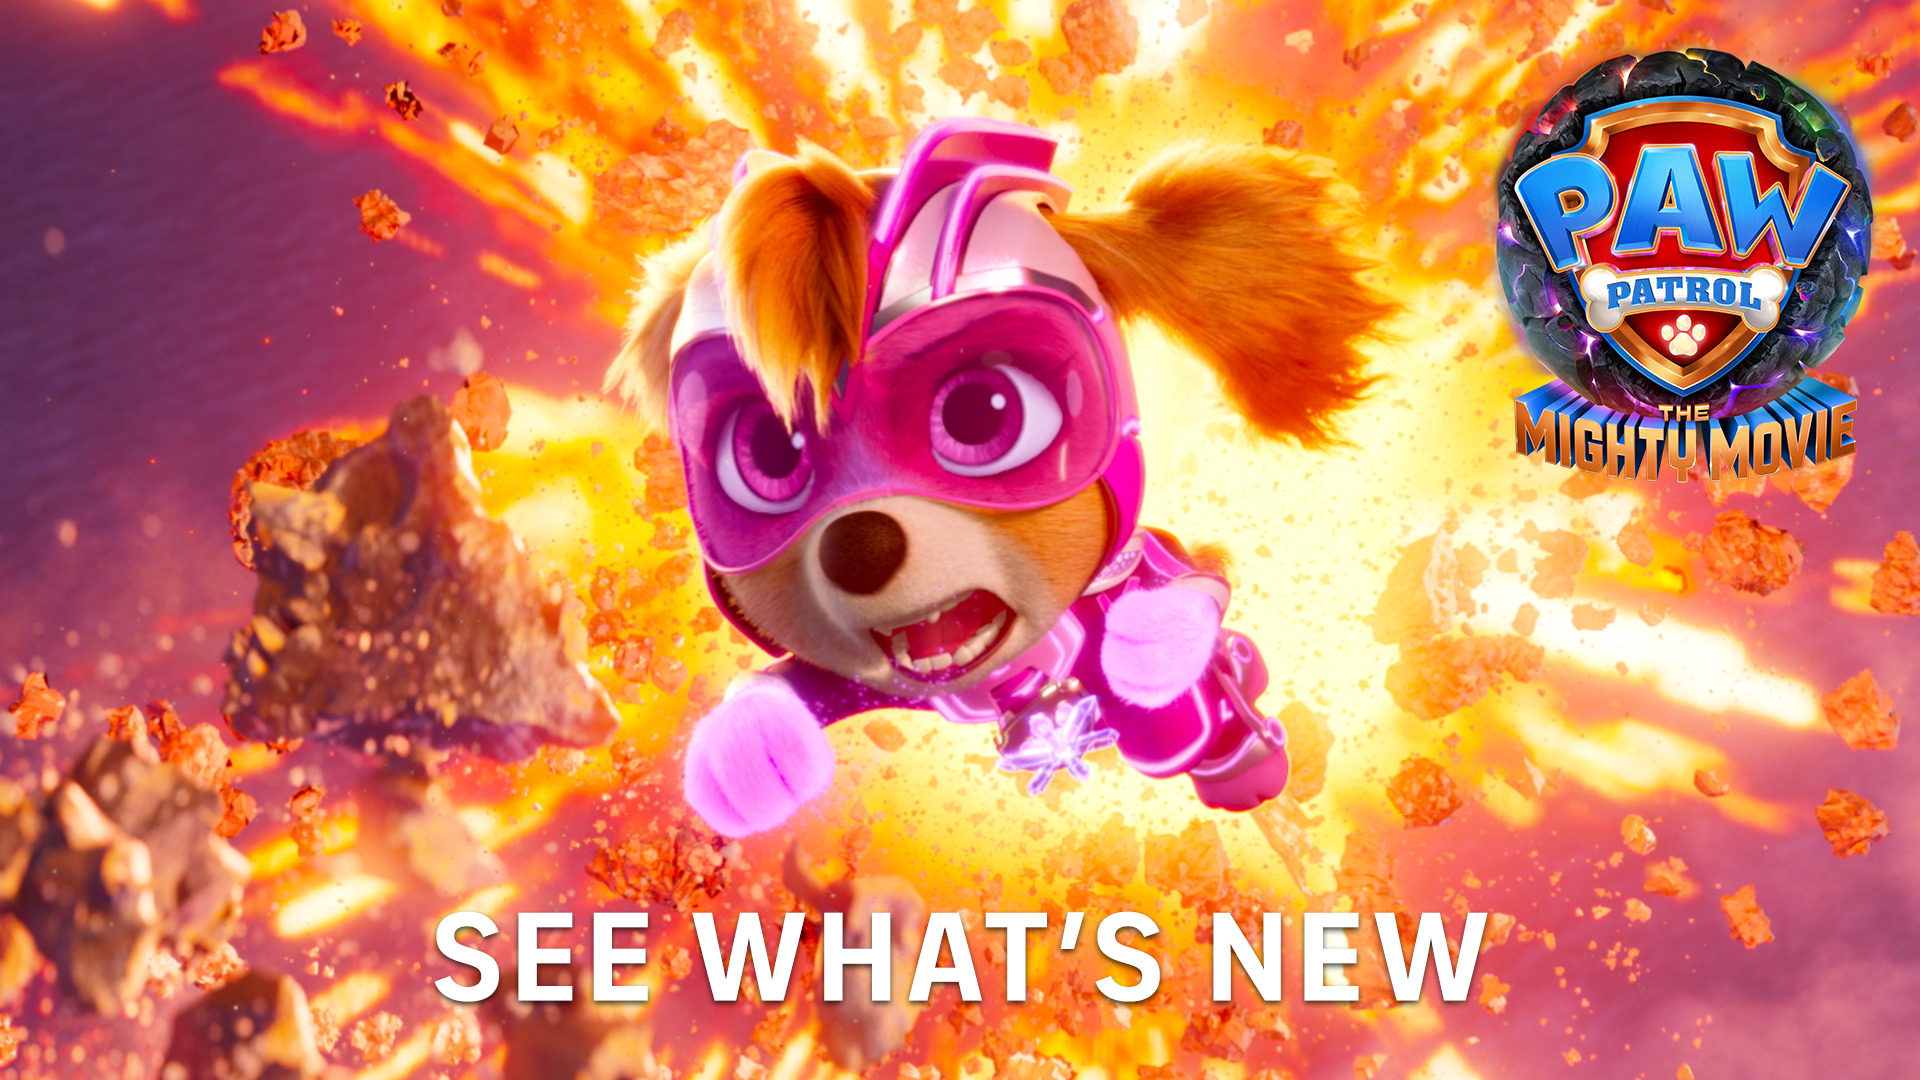 Watch Paramount + PAW Patrol The Mighty Movie What’s New Featurette